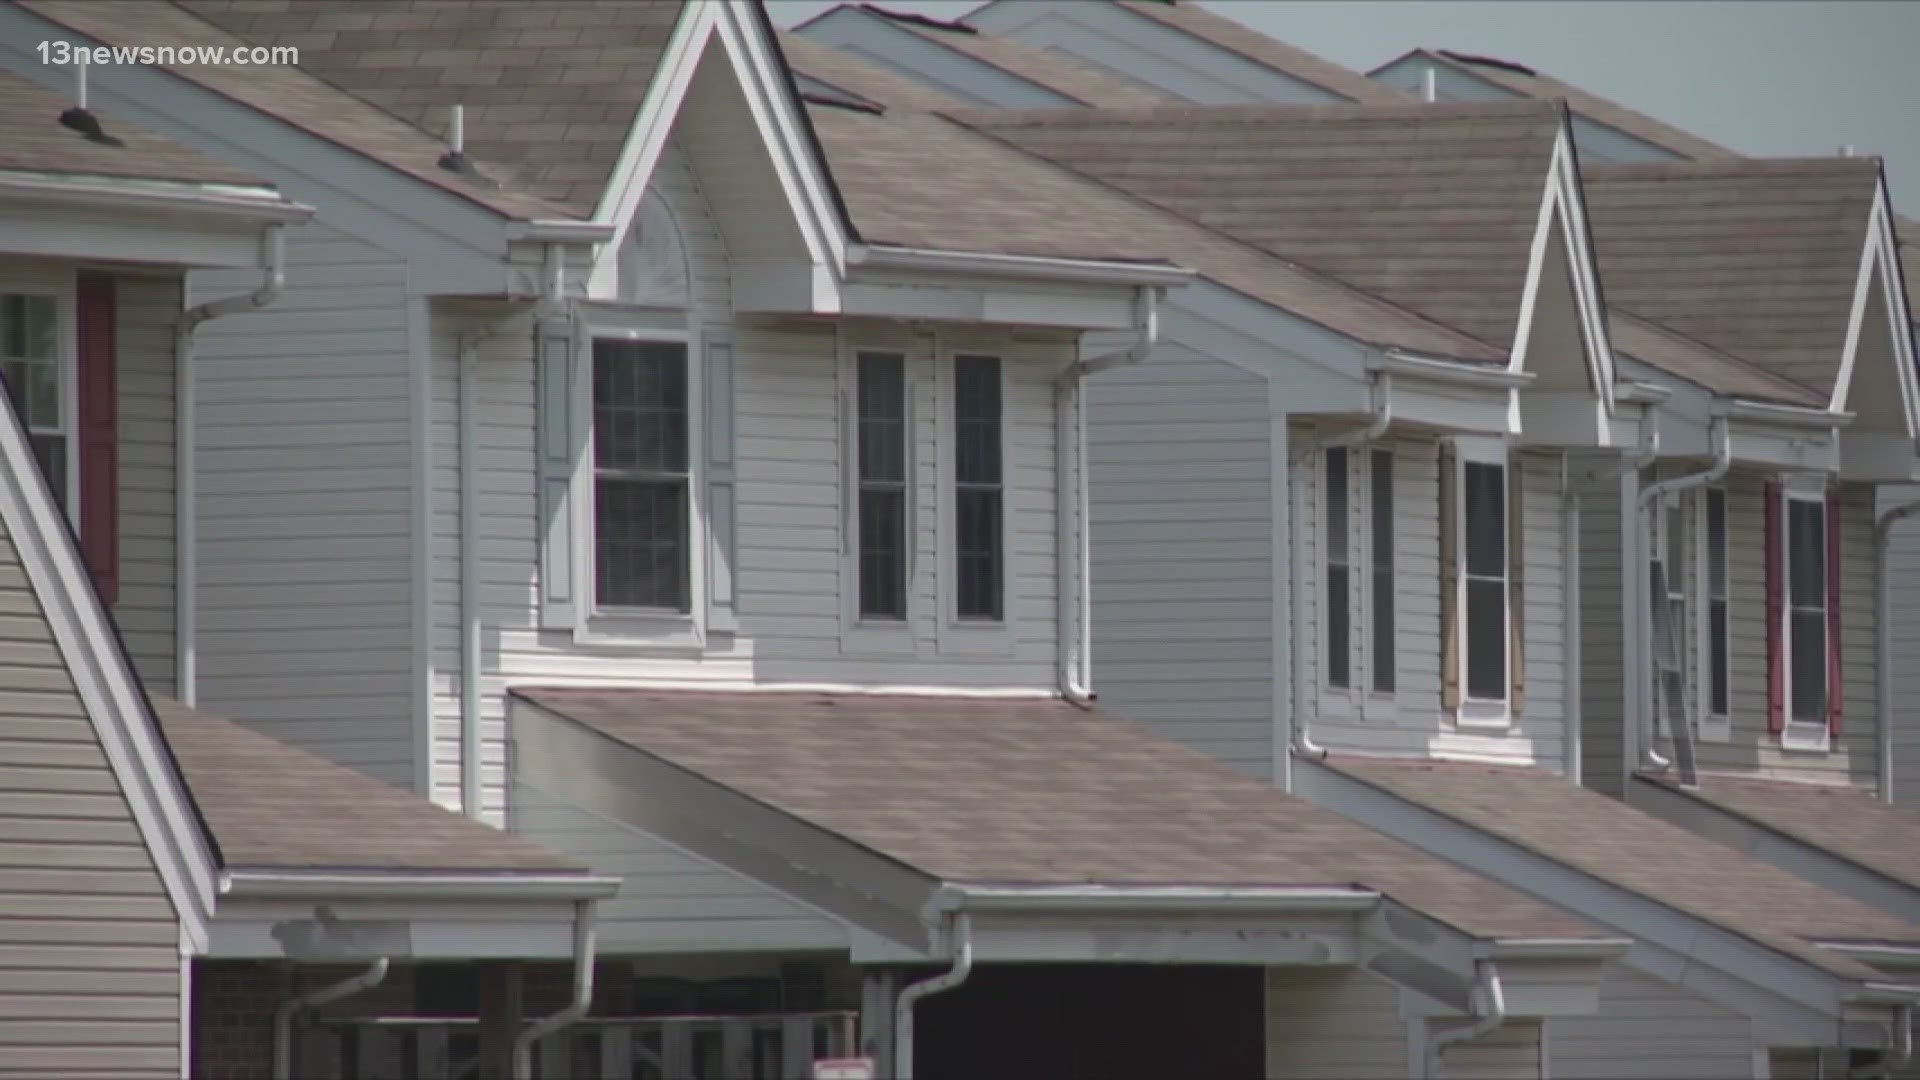 Several military housing complexes in Virginia Beach and Norfolk are in for a major facelift.